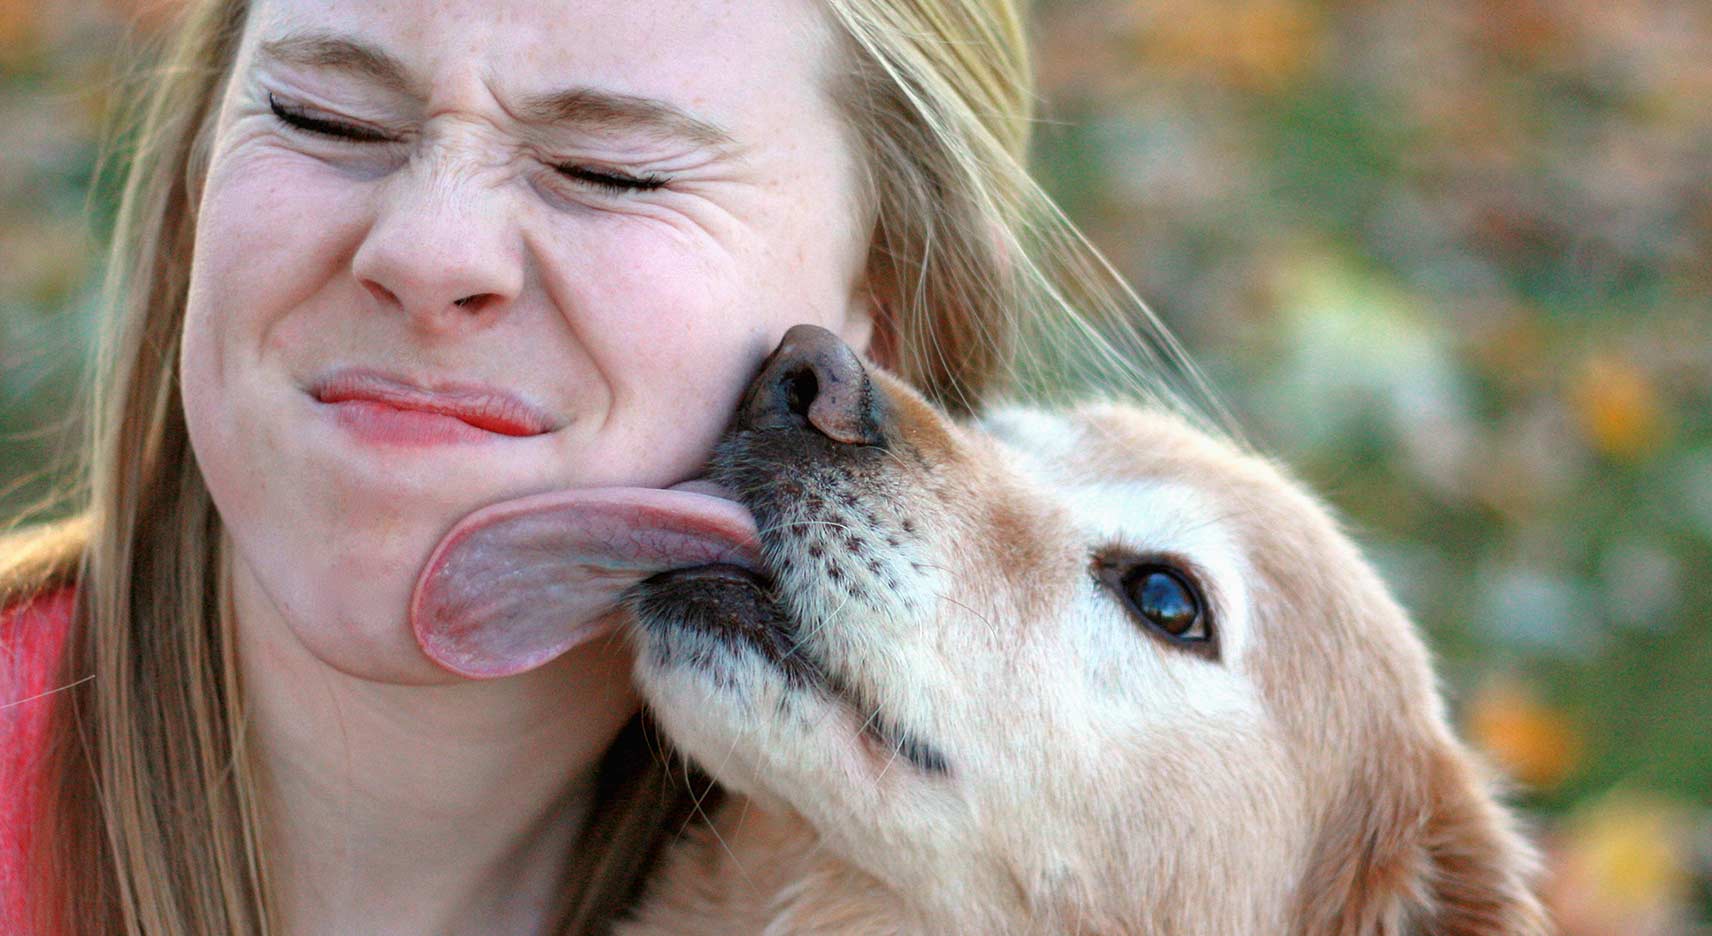 Why does my dog lick me?